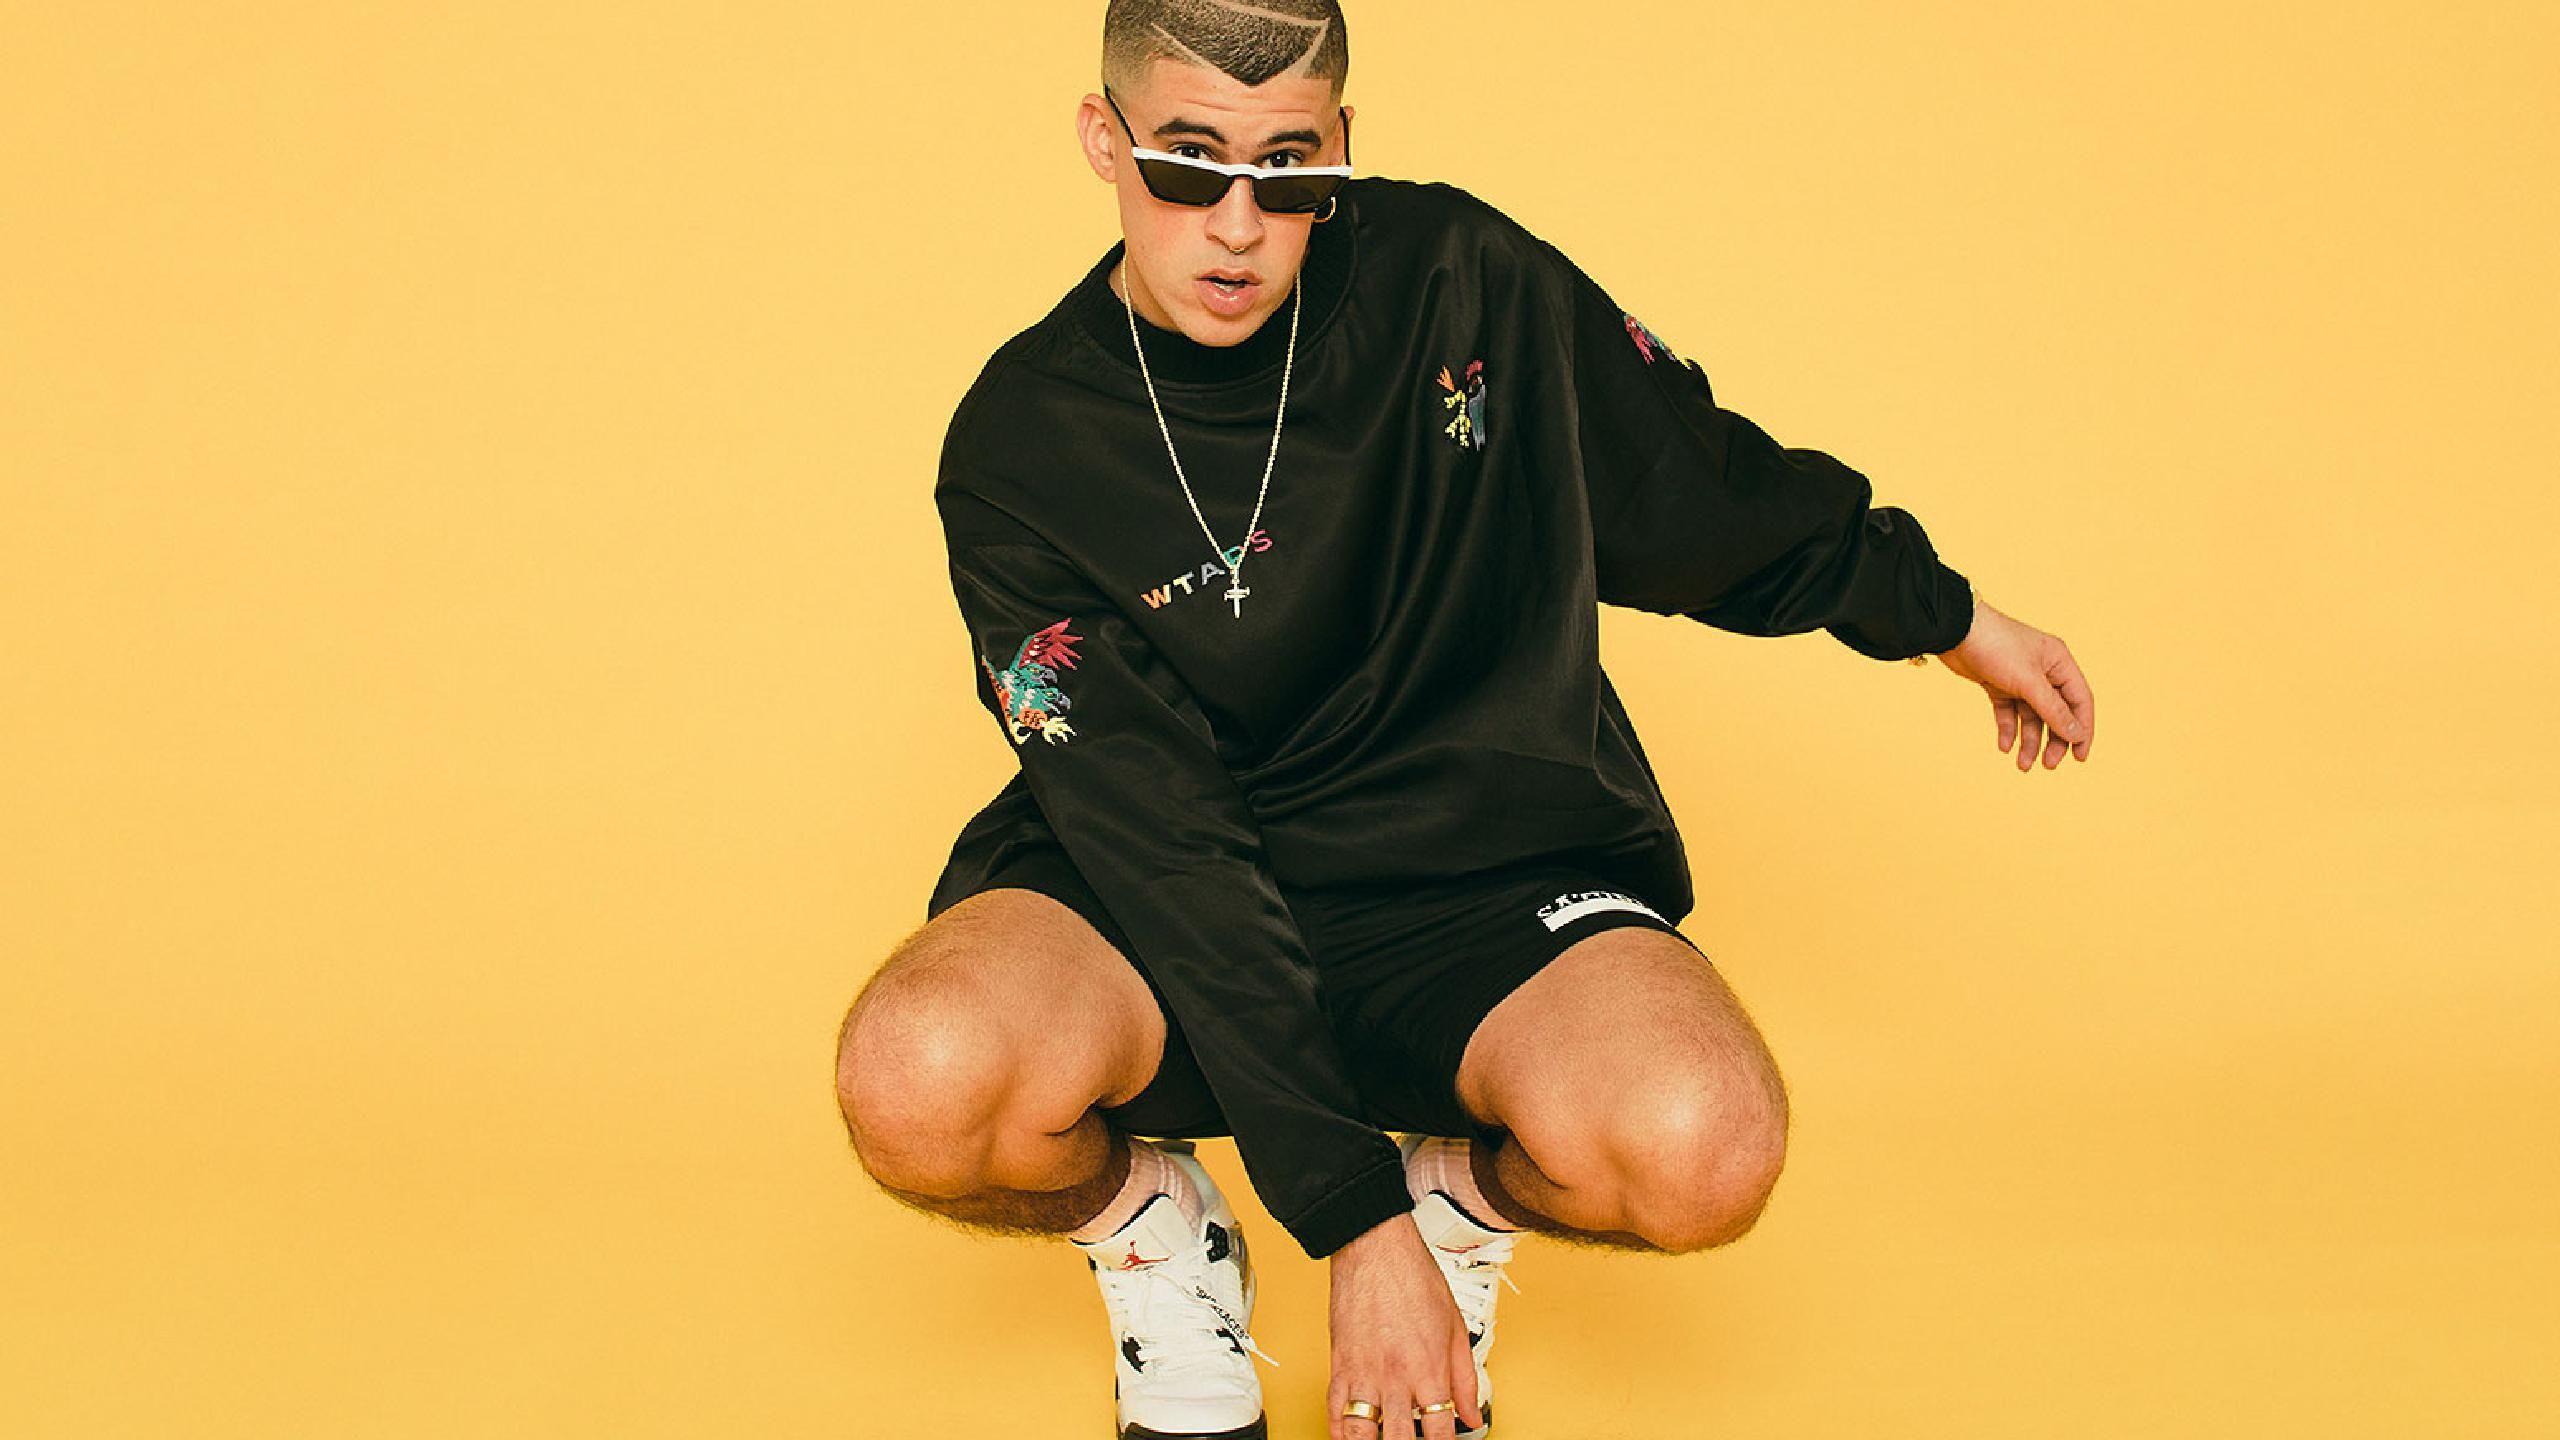 Bad Bunny 2020 Wallpapers Top Free Bad Bunny 2020 Backgrounds Wallpaperaccess